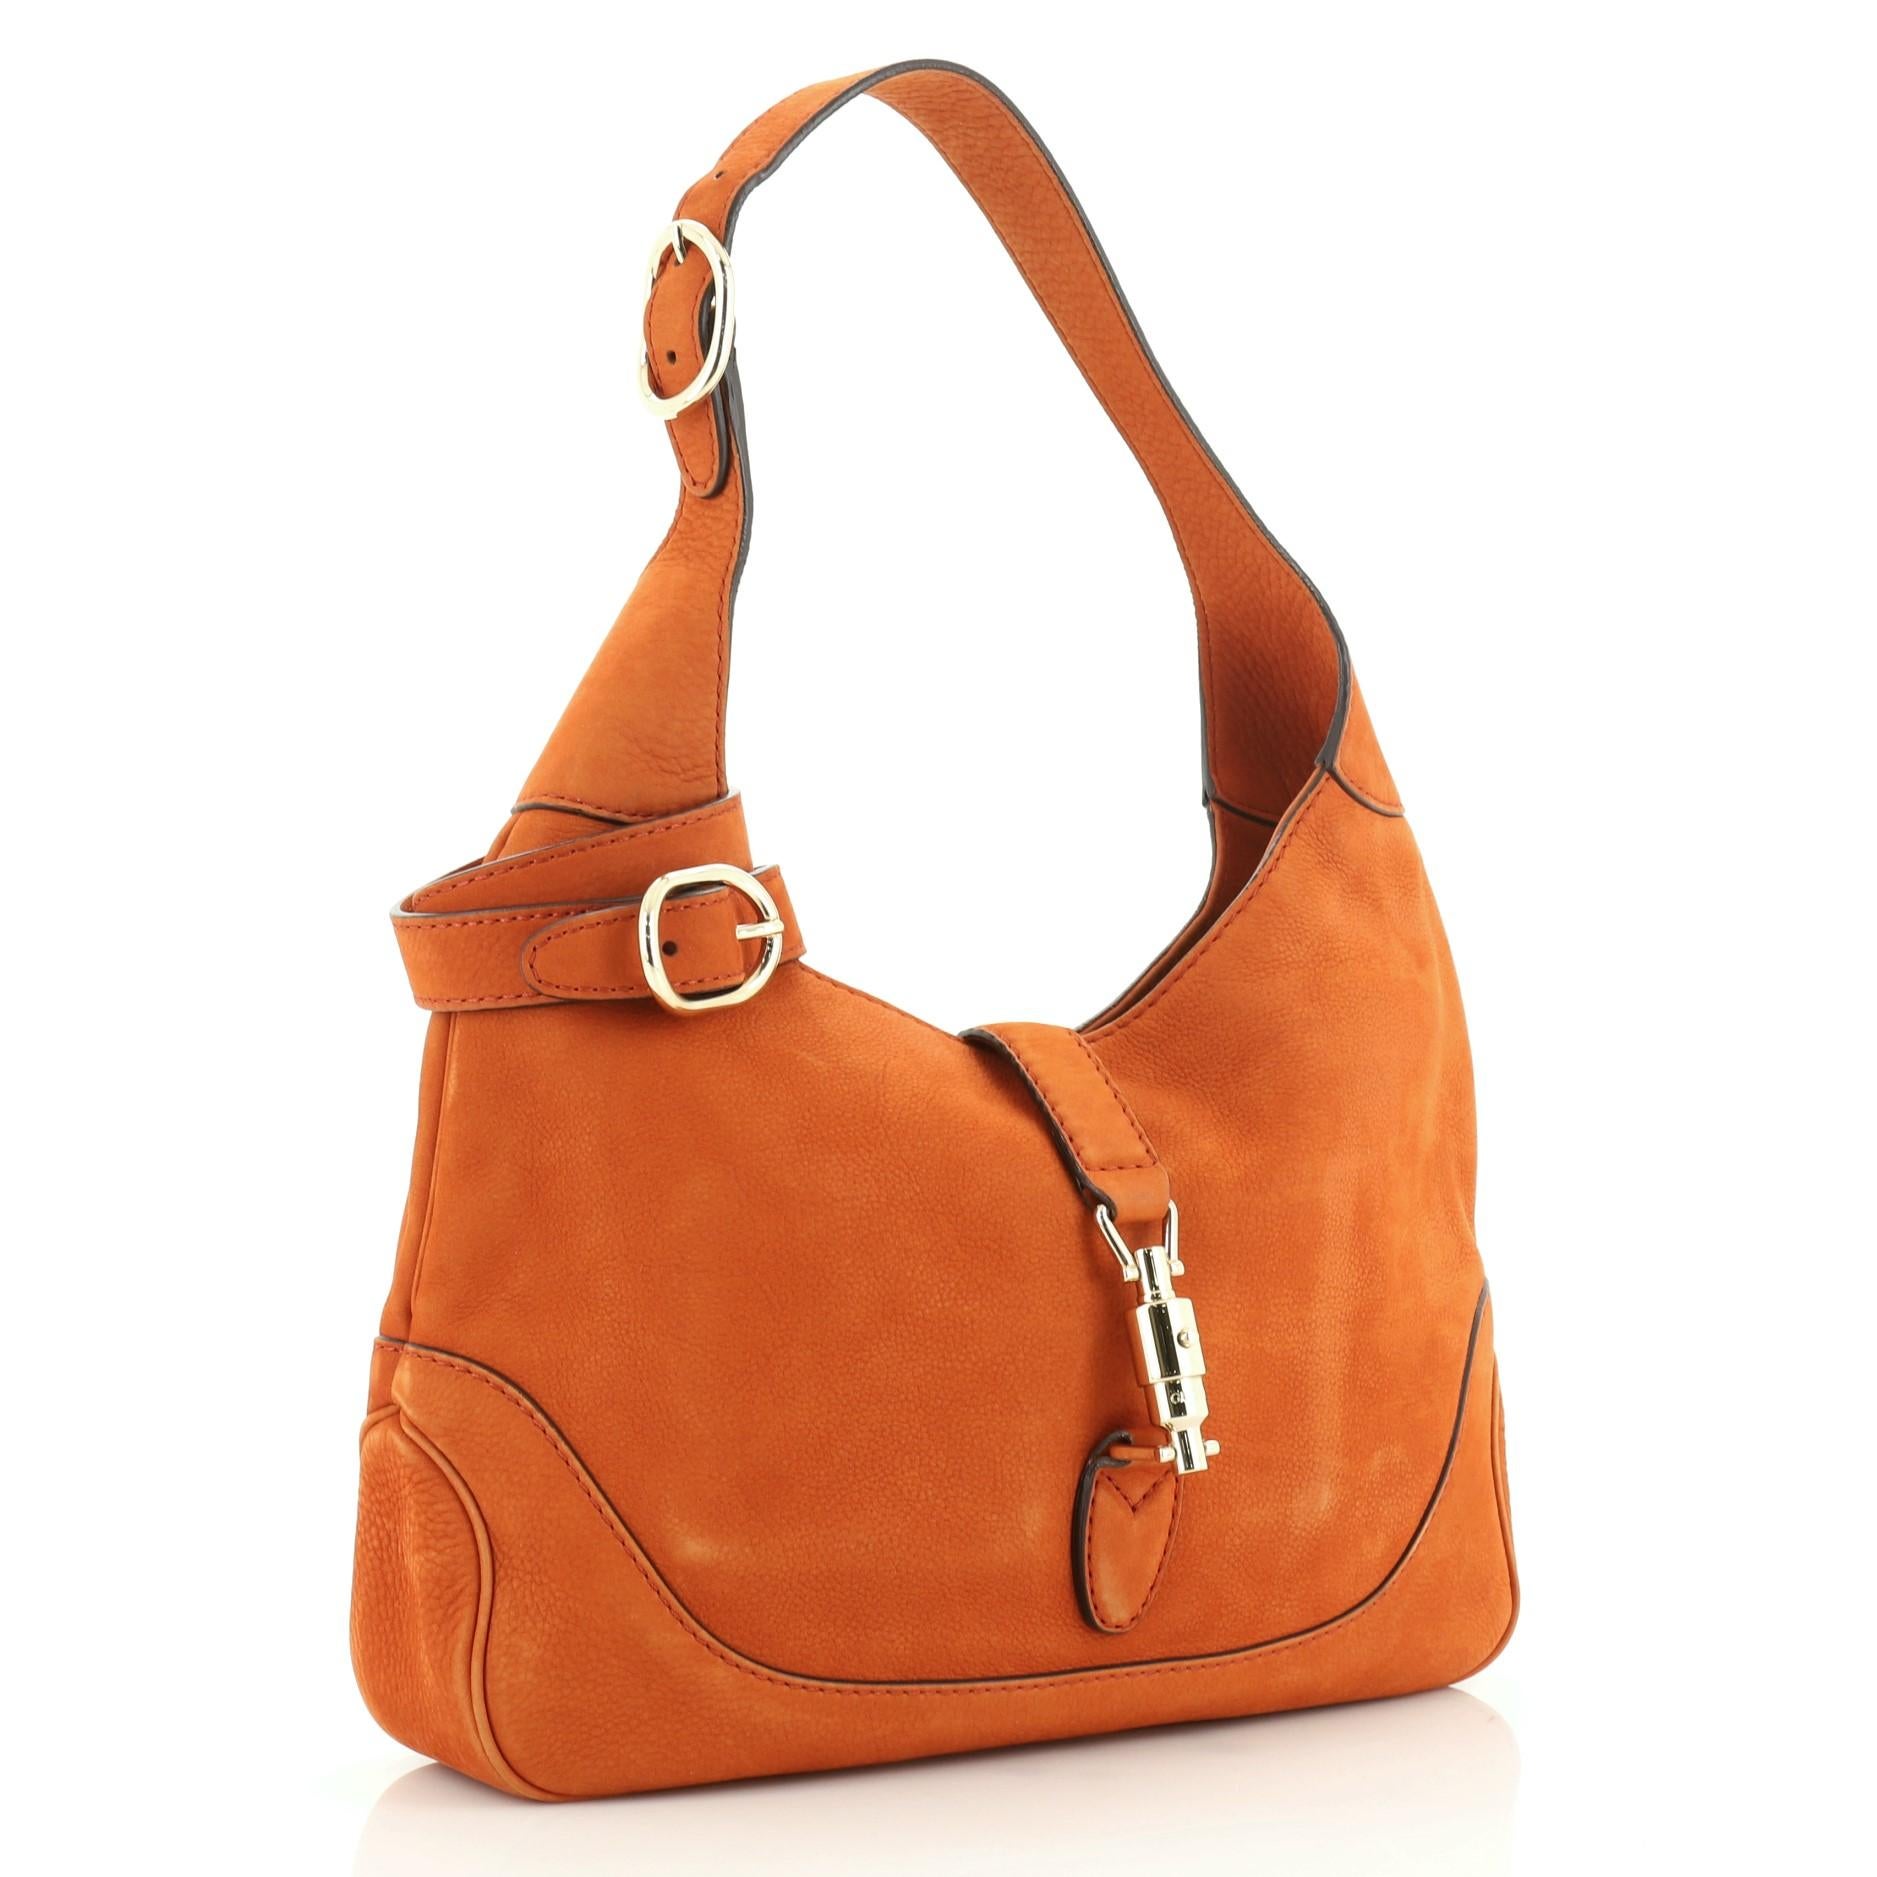 This Gucci Jackie Original Shoulder Bag Nubuck Medium, crafted from orange nubuck, features an adjustable shoulder strap and gold-tone hardware. Its piston lock closure opens to a neutral fabric interior with zip and slip pockets. 

Estimated Retail